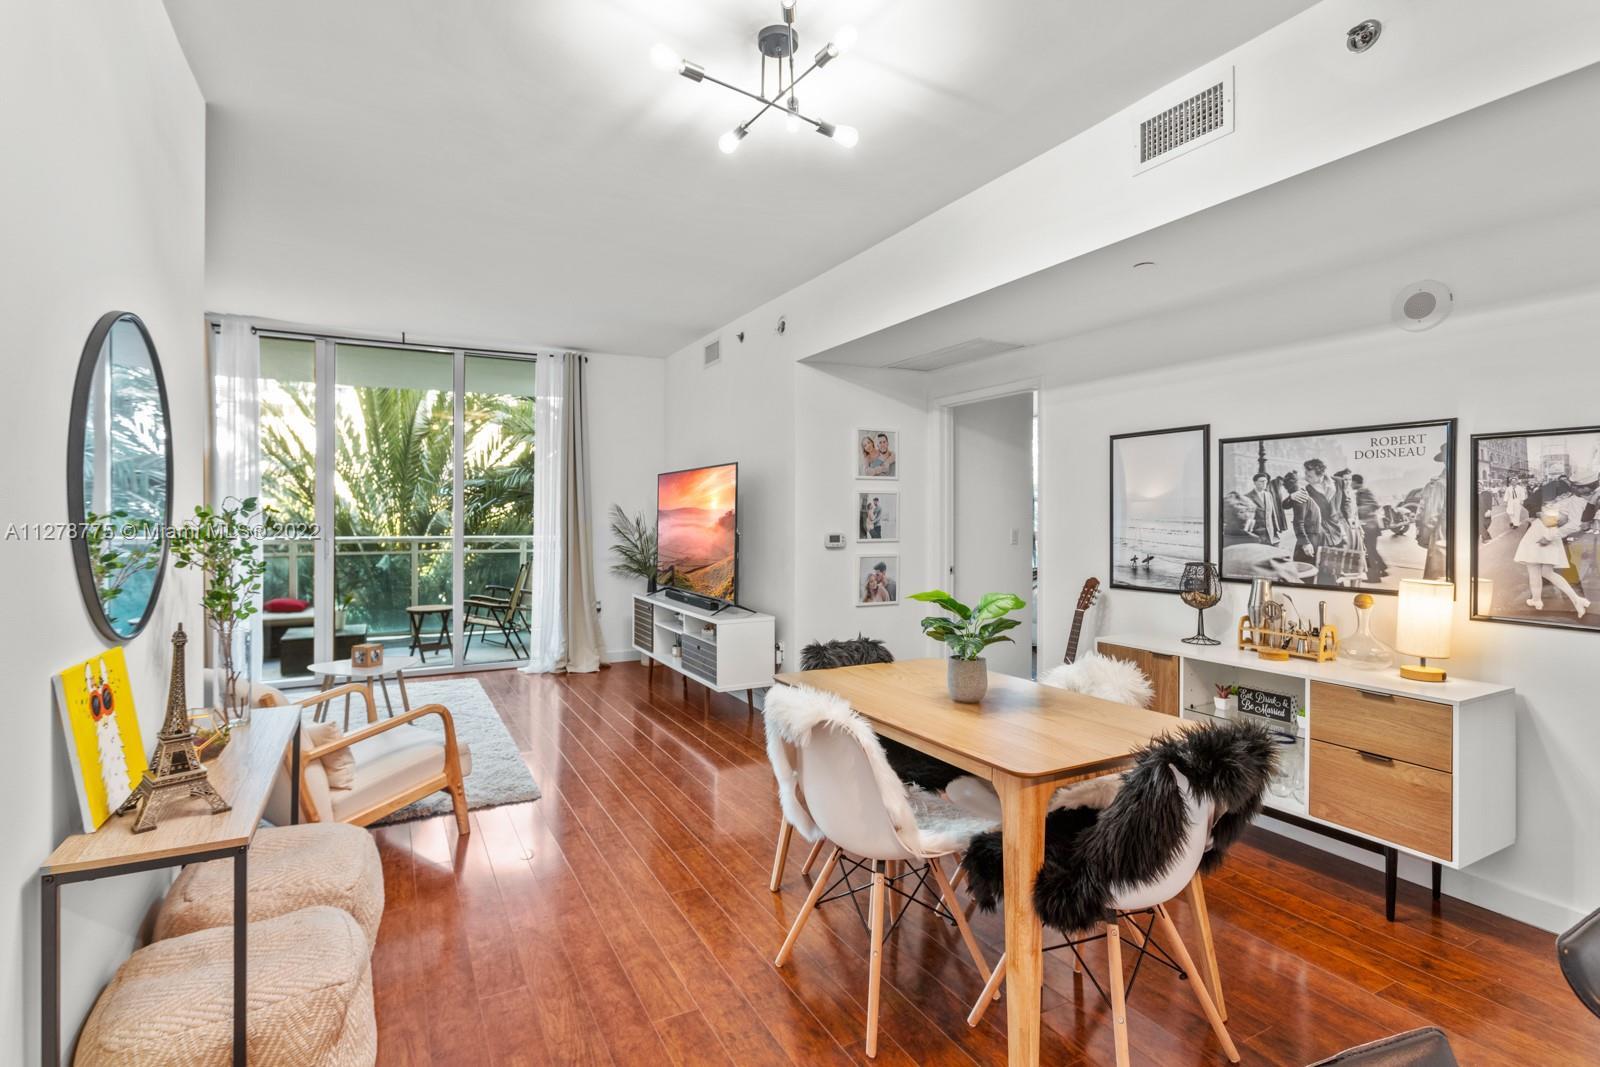 FANTASTIC 1 BED 1 BATH IN BRICKELL PLAZA CONDOMINIUM. WOOD FLOORS, IMPECCABLE OPEN KITCHEN WITH STAI